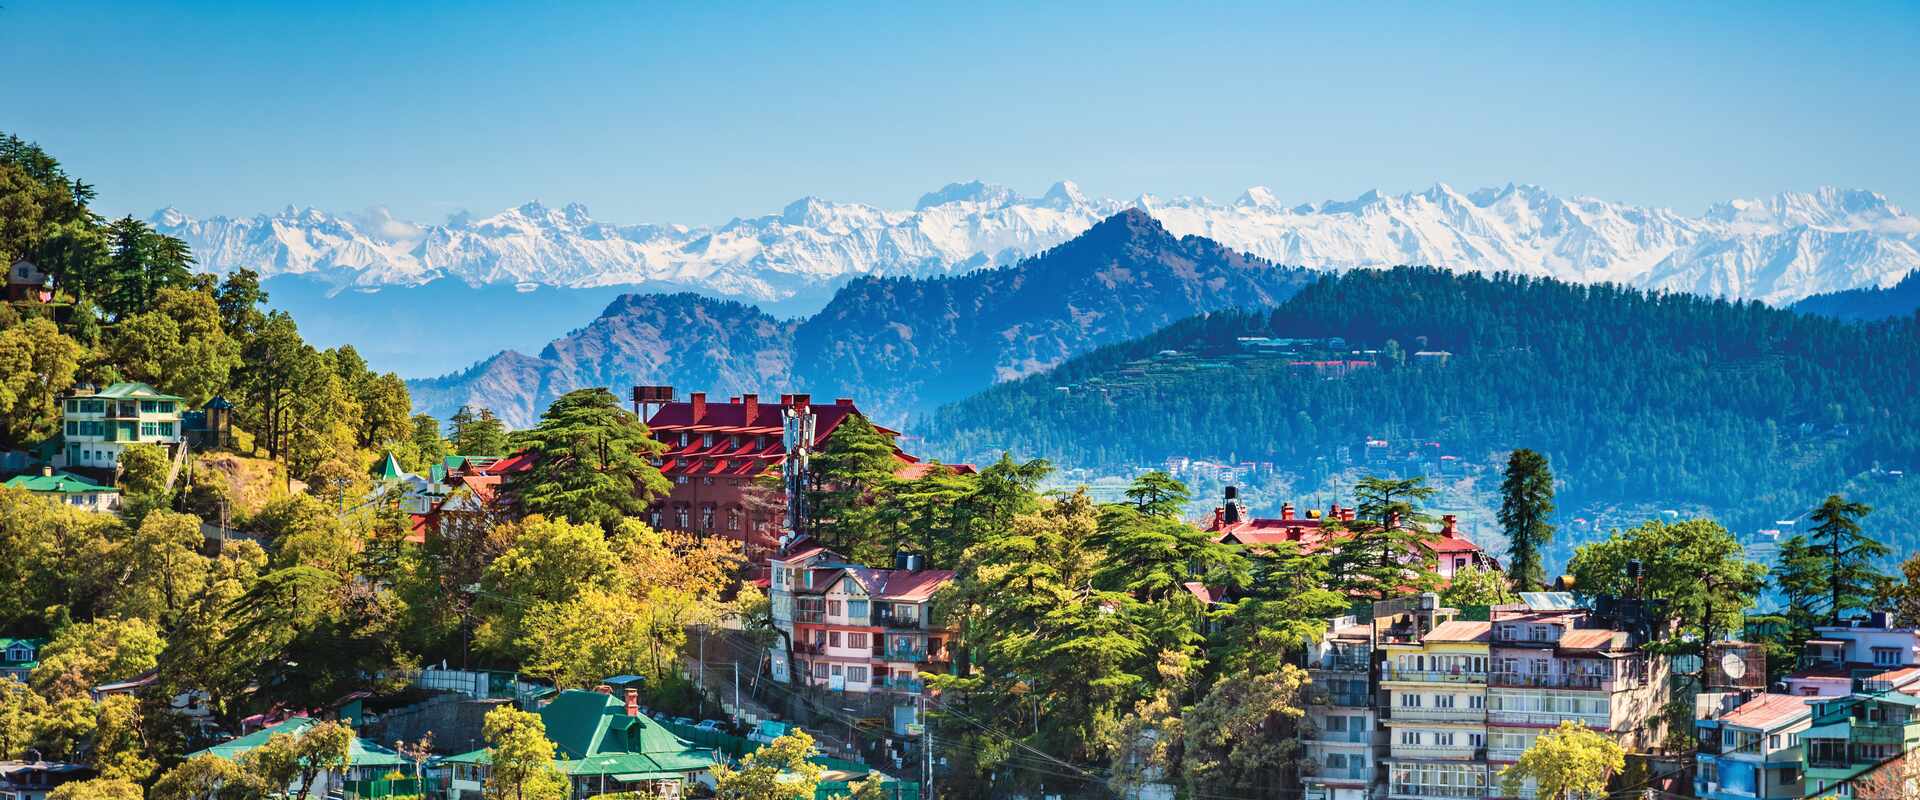 Panorama of Shimla cityscape with Himalayas in background, India